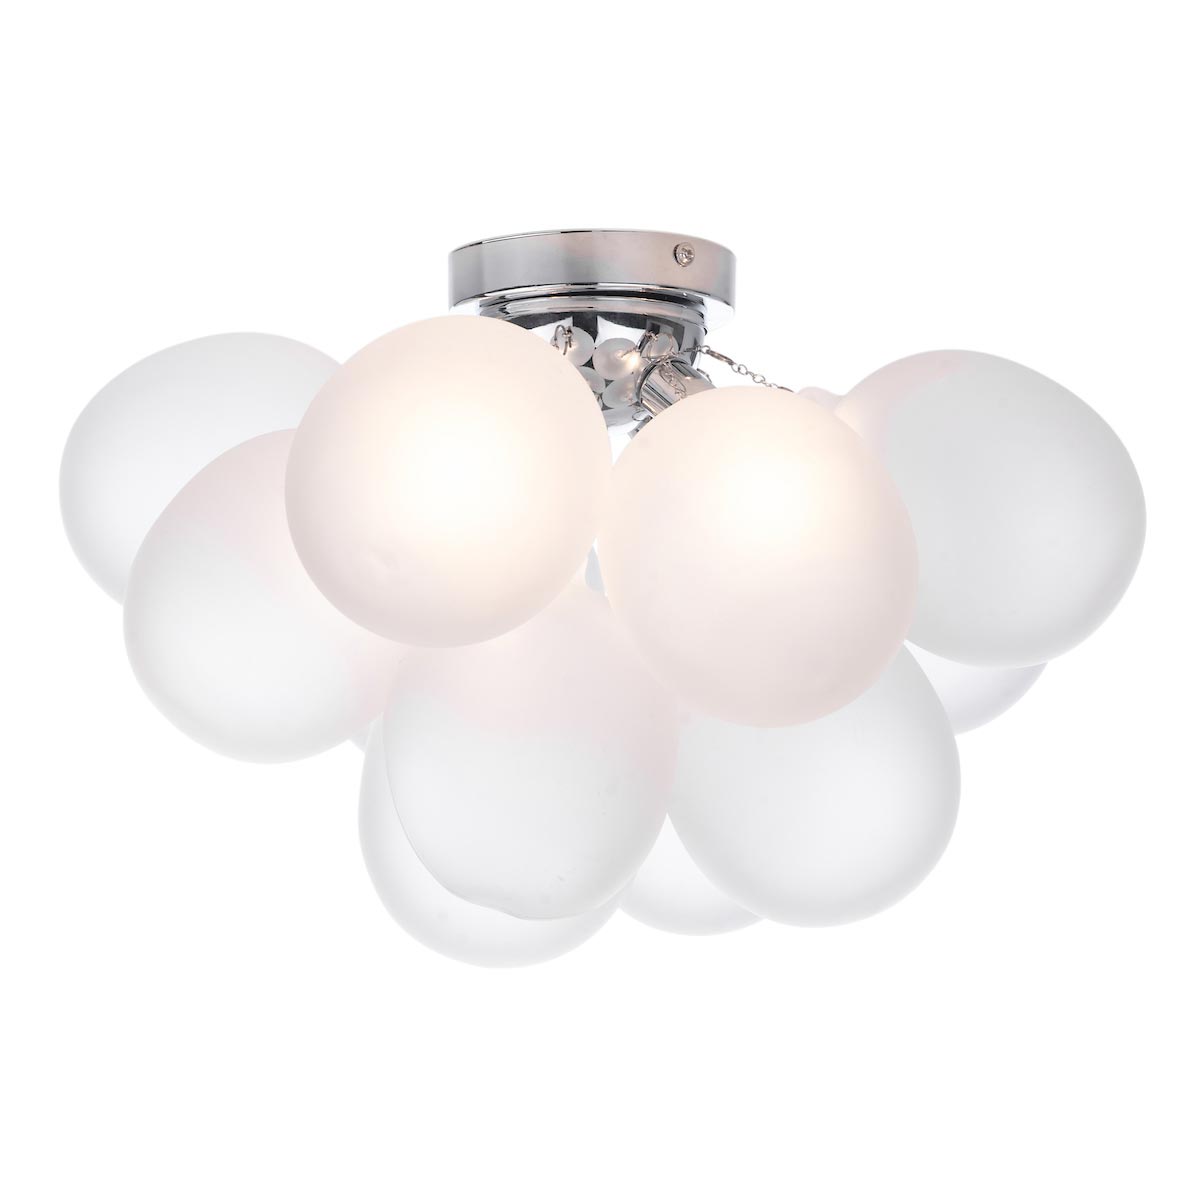 Dar Bubbles 4 Lamp Flush Low Ceiling Light Chrome Frosted Glass